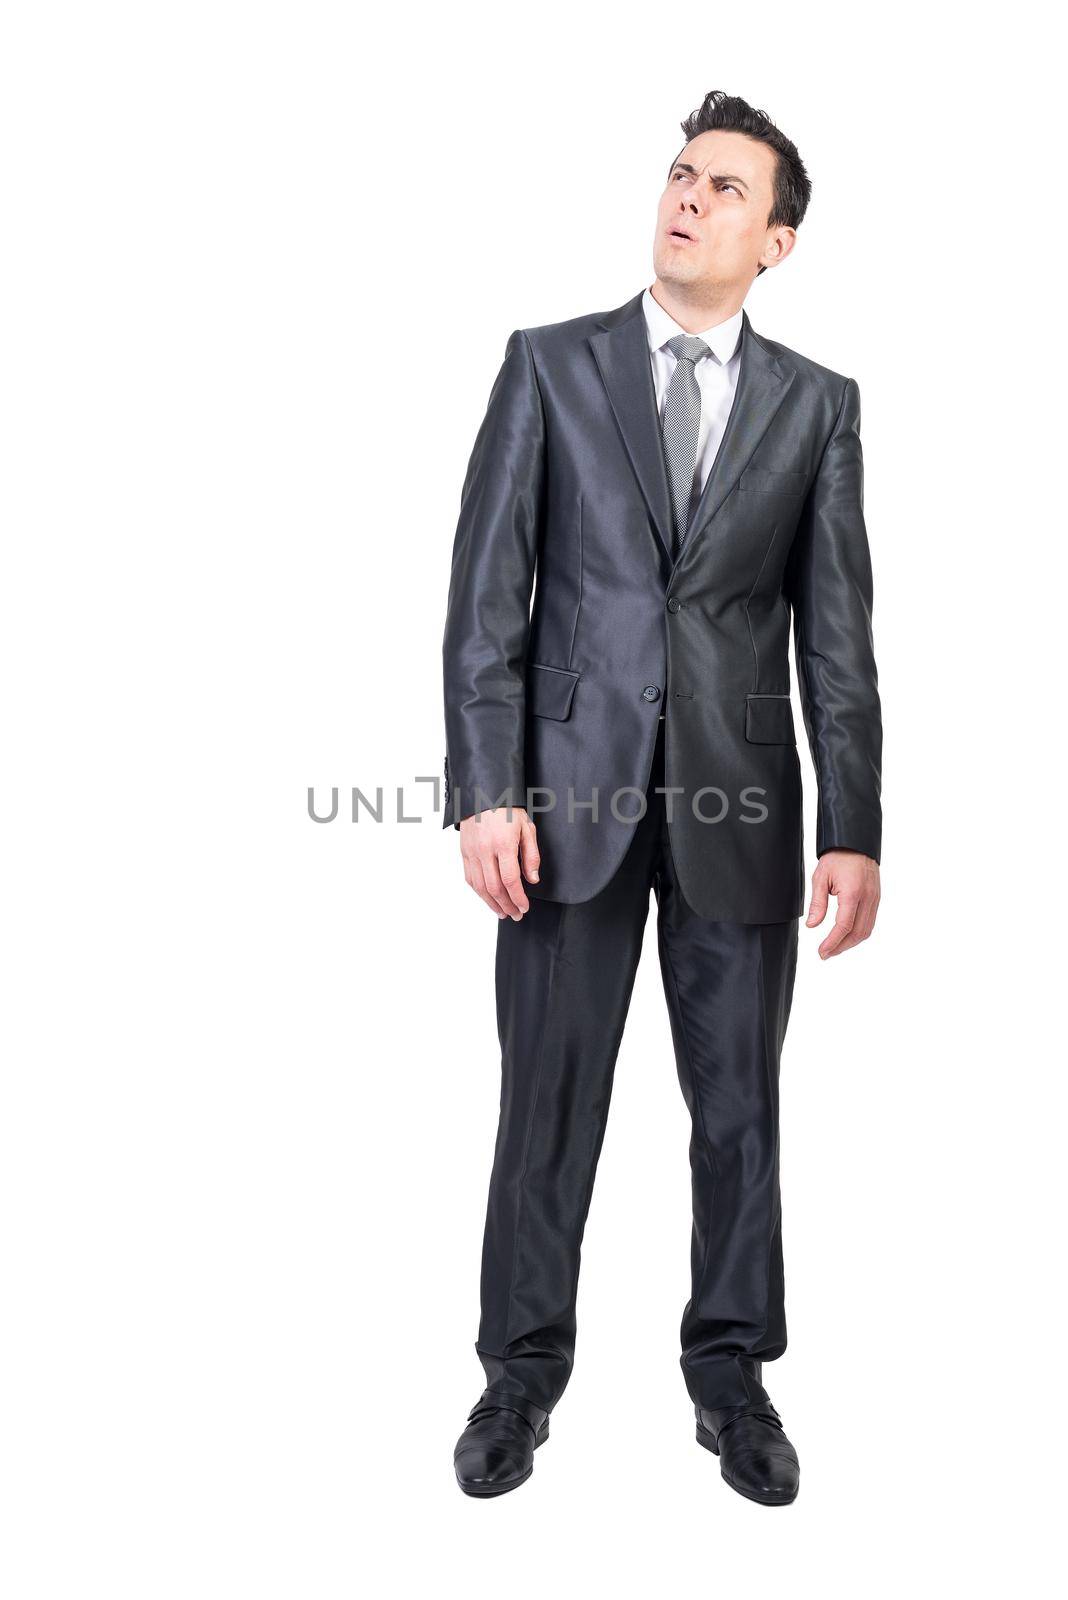 Full body of skeptic male entrepreneur grimacing and looking up while expressing mistrust on white background in studio